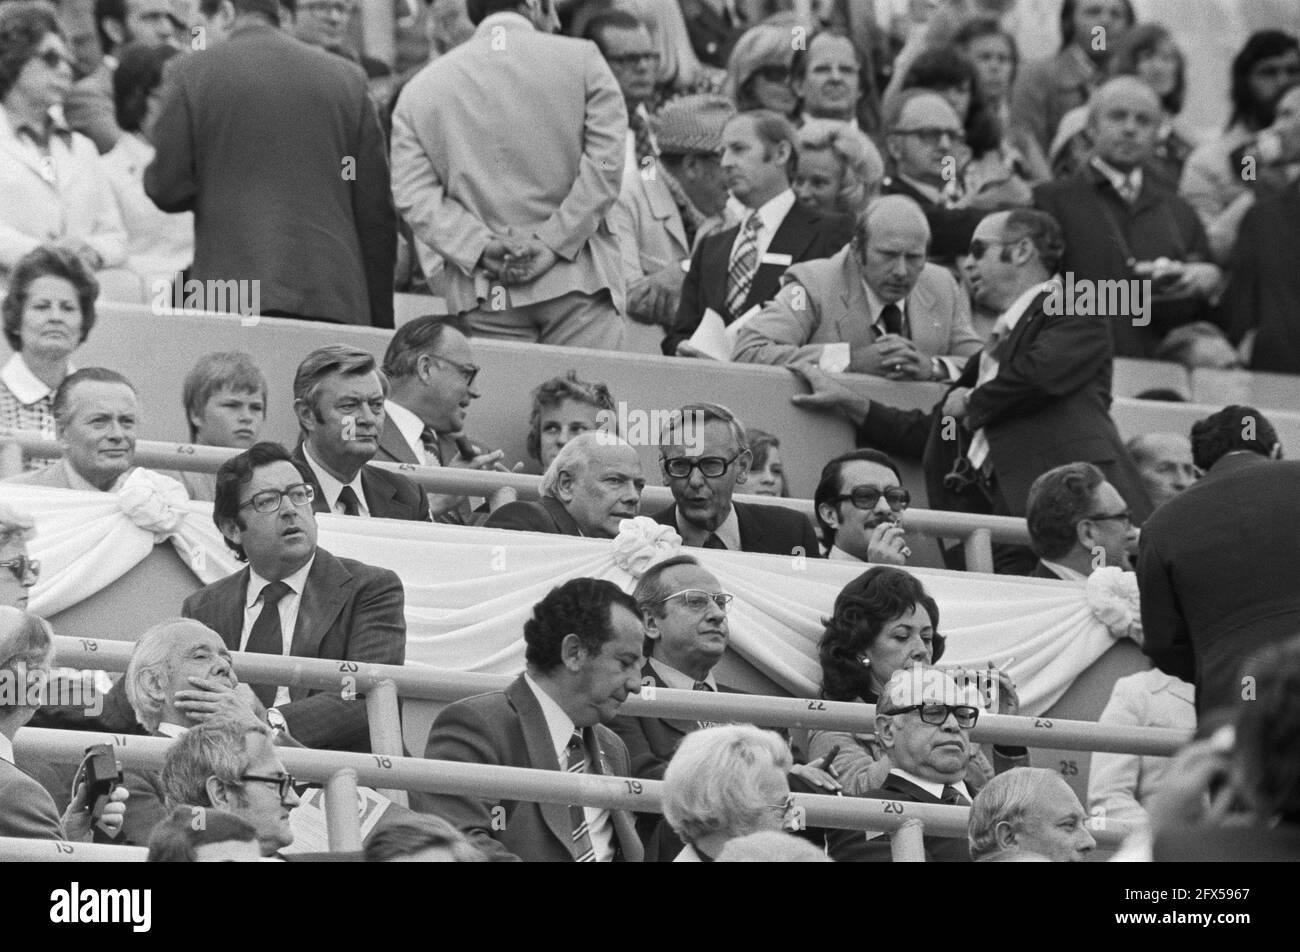 Finals World Cup 1974 in Munich, West Germany v Netherlands 2-1; Den Uyl (center) on grandstand, July 7, 1974, finals, sports, grandstands, soccer, world championships, The Netherlands, 20th century press agency photo, news to remember, documentary, historic photography 1945-1990, visual stories, human history of the Twentieth Century, capturing moments in time Stock Photo